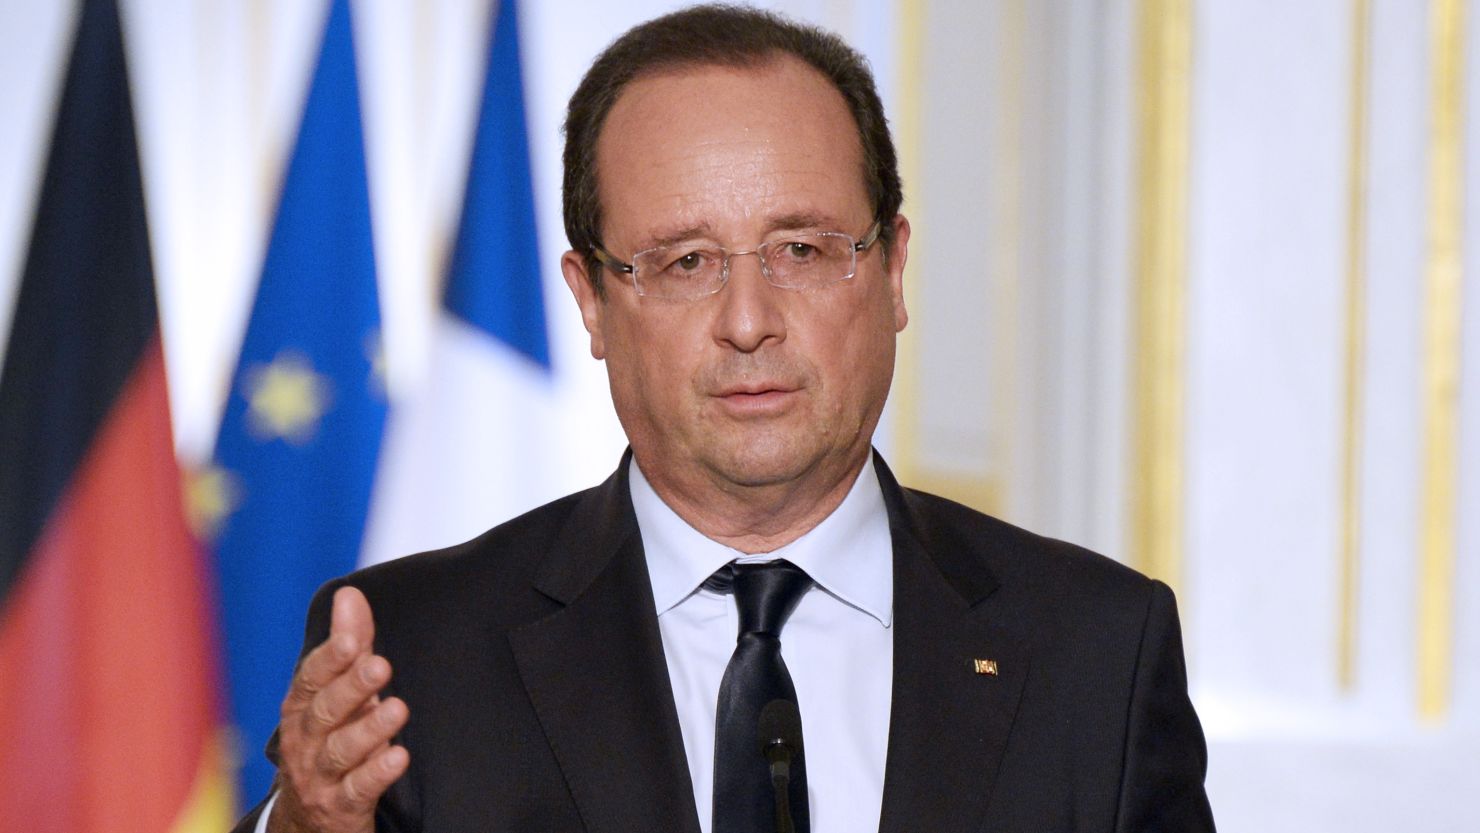 French President Francois Hollande speaks during a press conference.